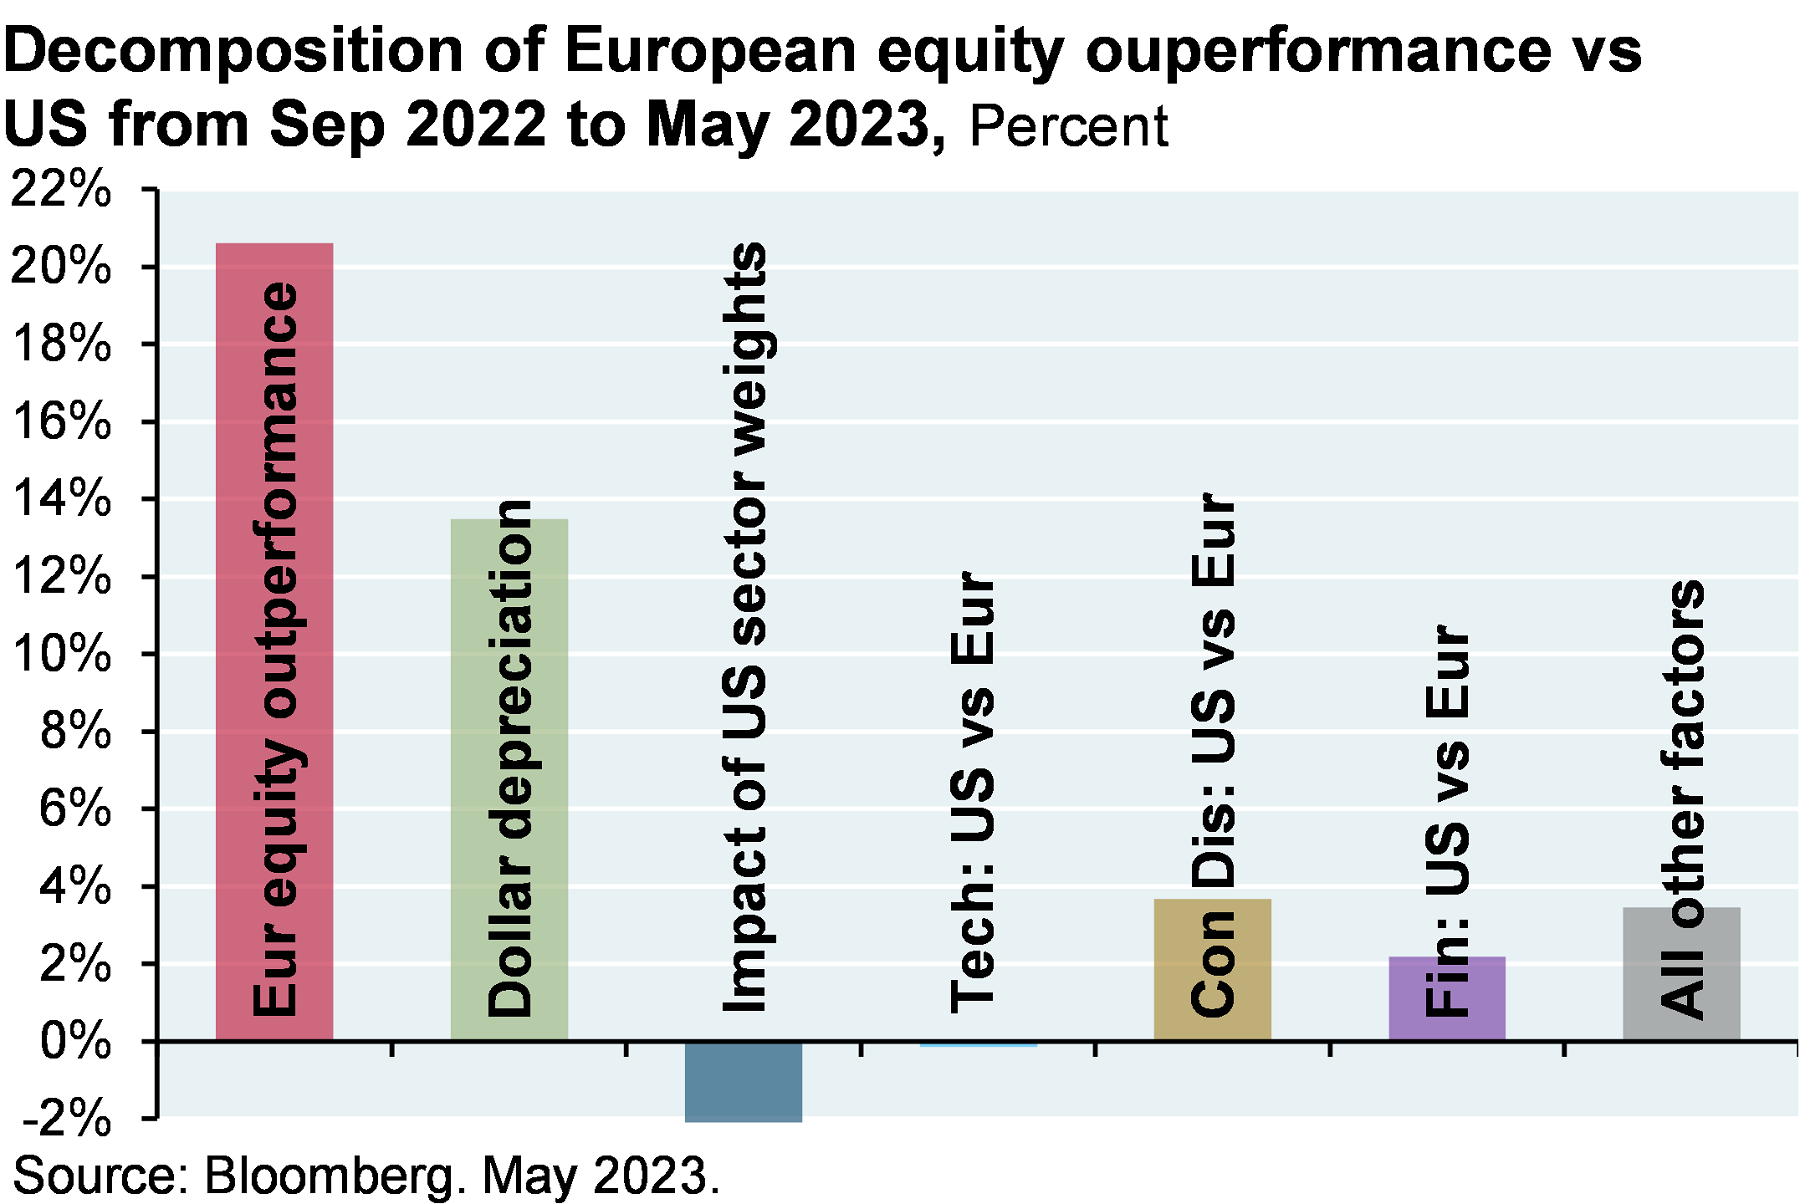 Decomposition of European equity outperformance vs US from Sep 2022 to May 2023.